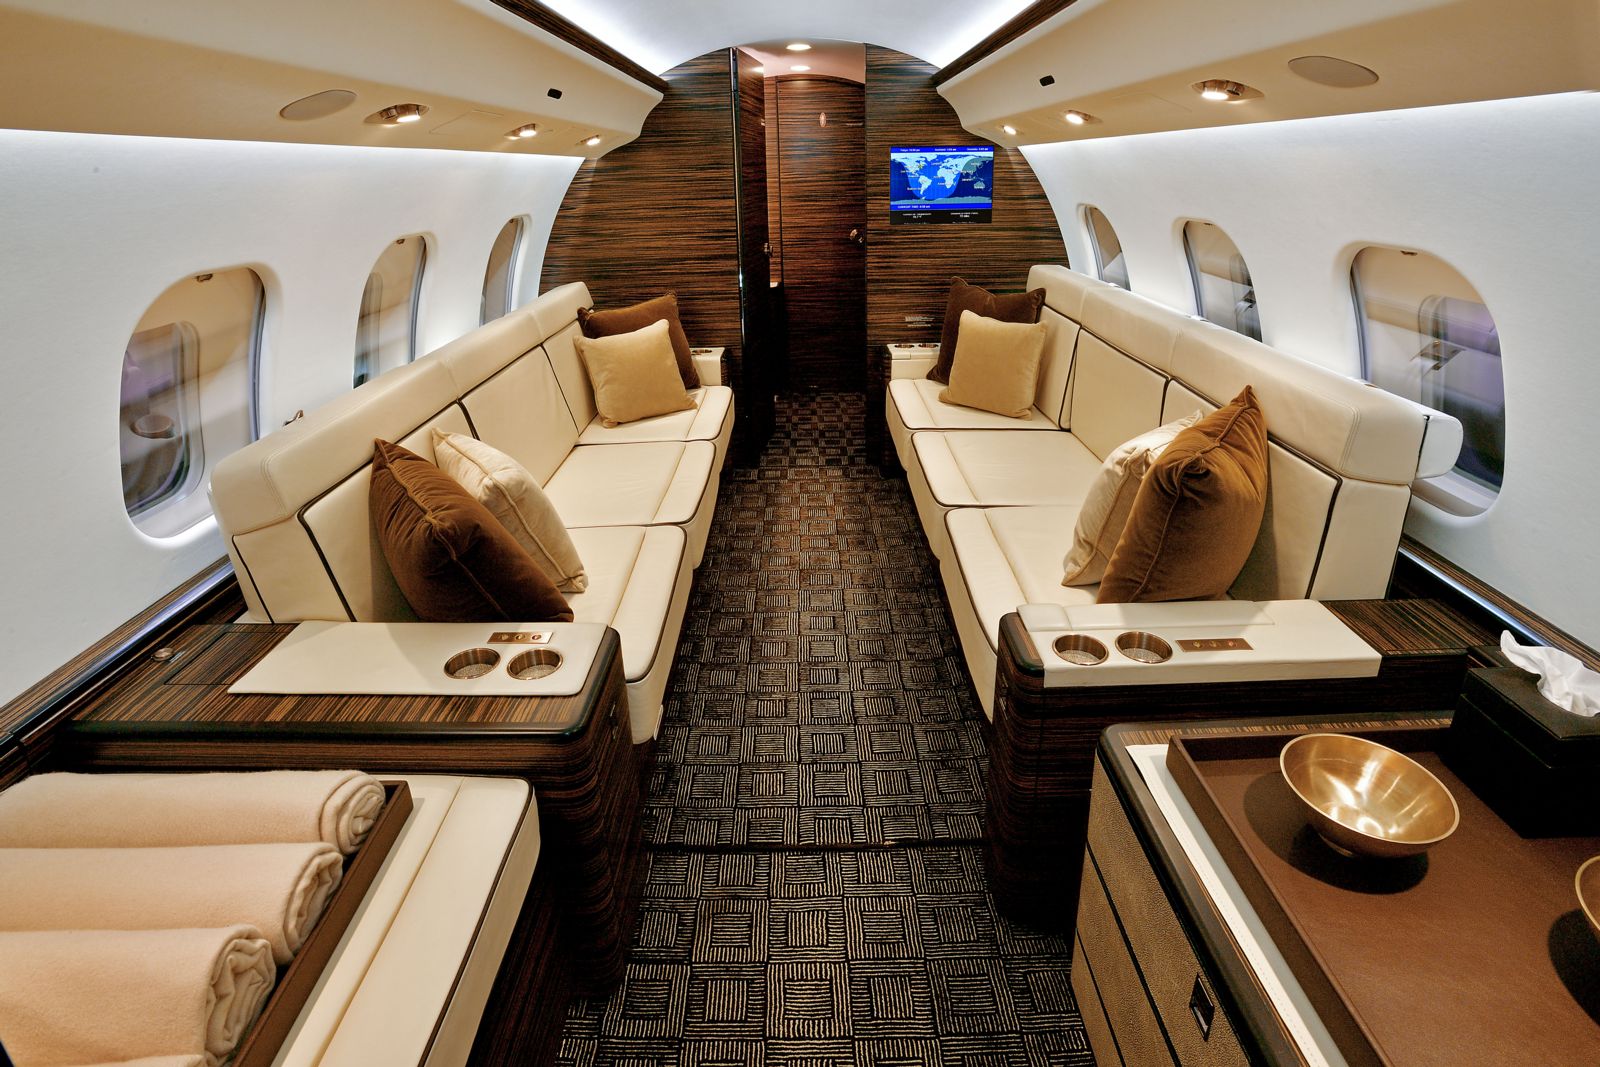 Debunking private jet travel myths, starting with the interior of the plane. 